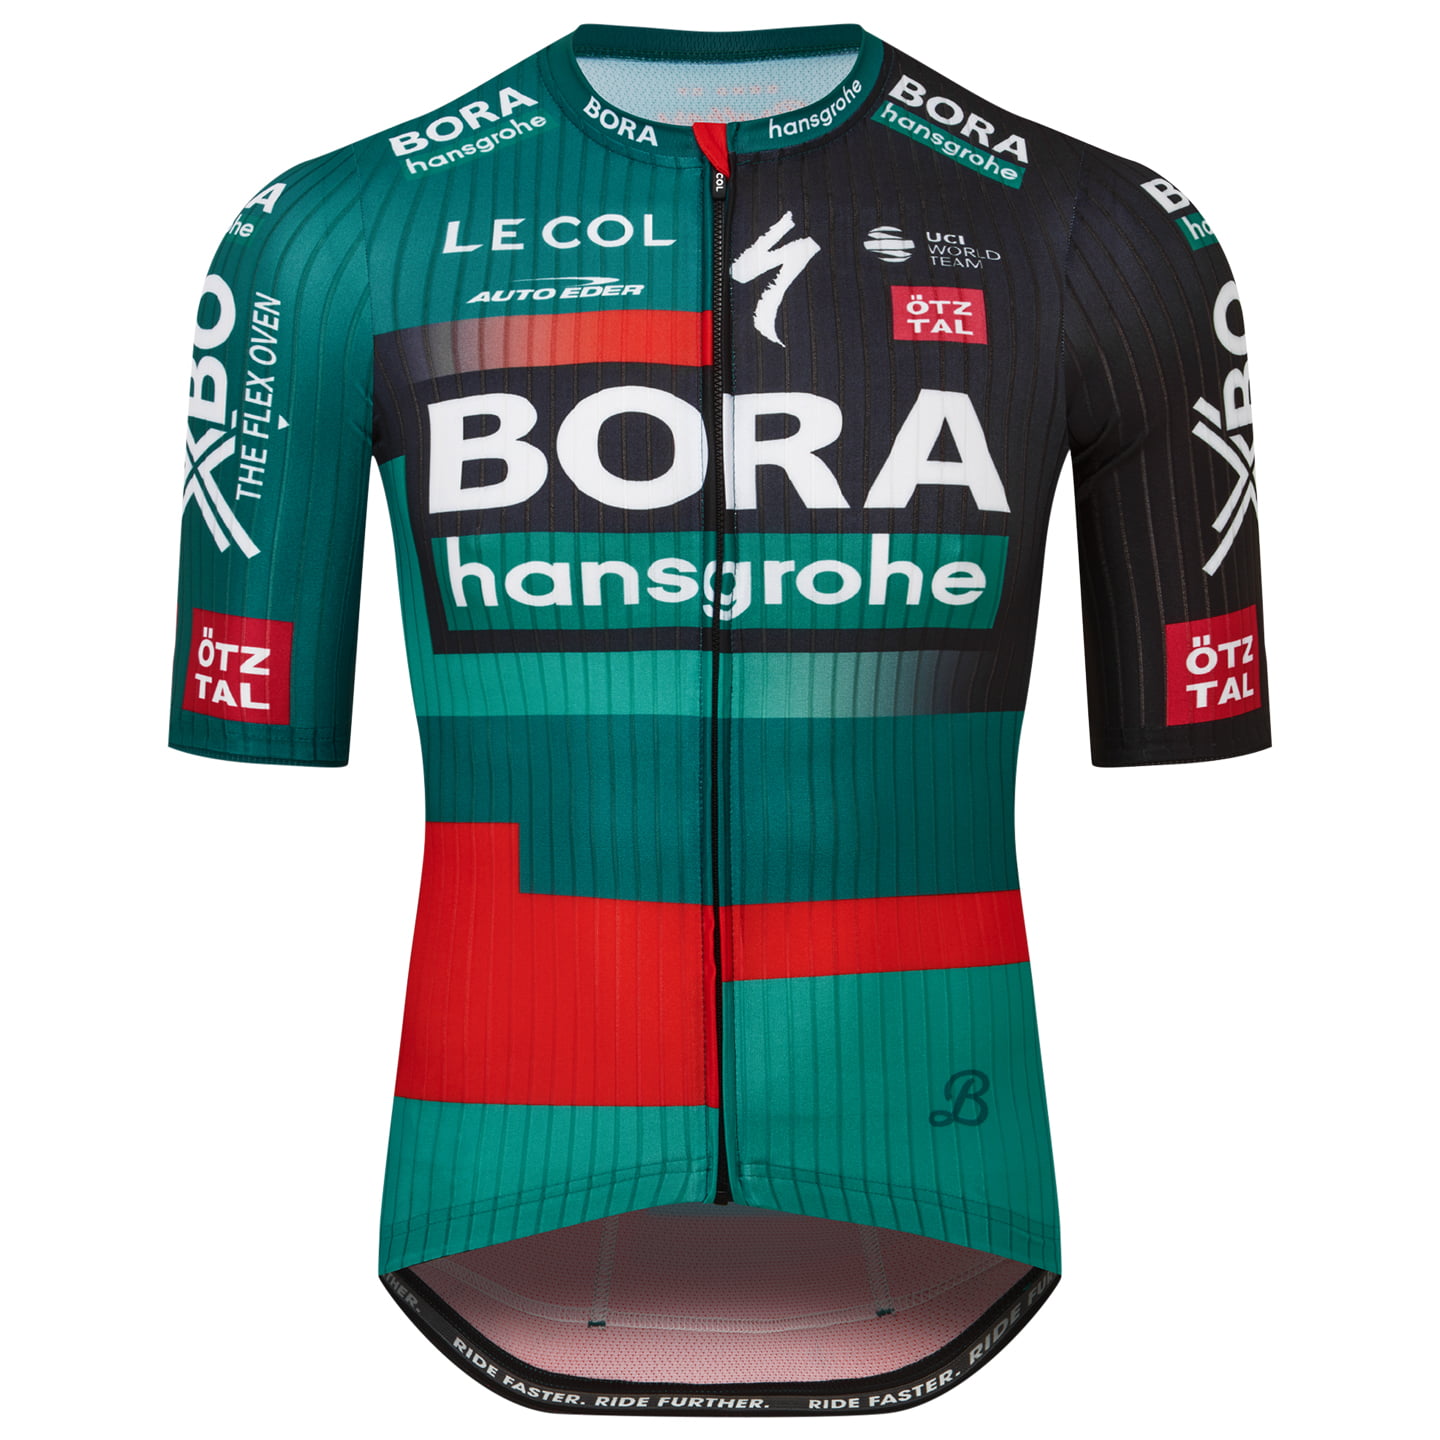 BORA-hansgrohe Race 2023 Short Sleeve Jersey, for men, size L, Cycling shirt, Cycle clothing